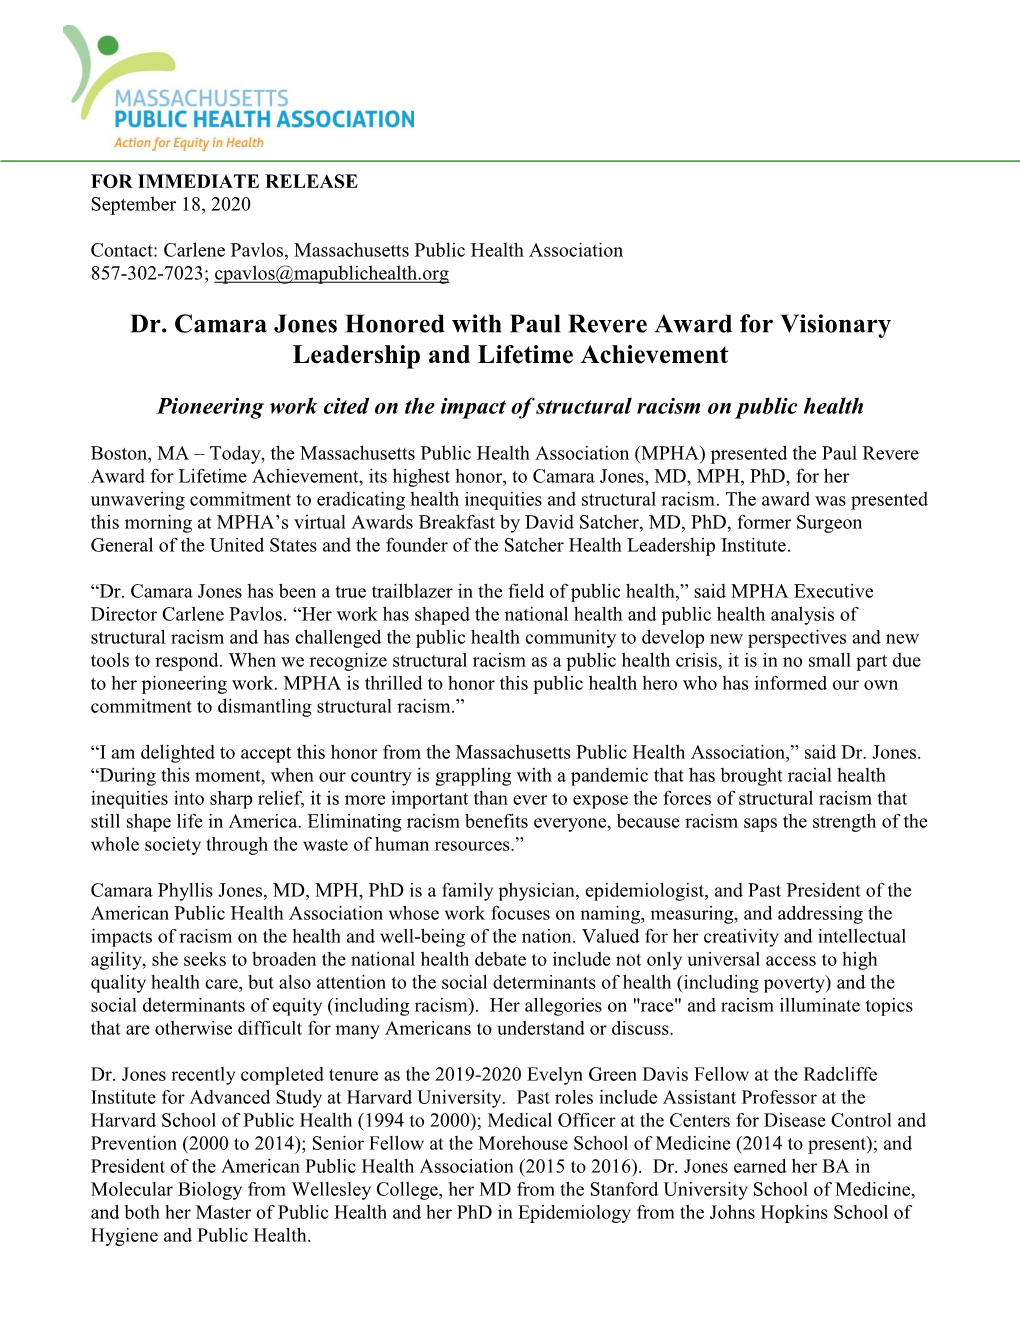 Dr. Camara Jones Honored with Paul Revere Award for Visionary Leadership and Lifetime Achievement